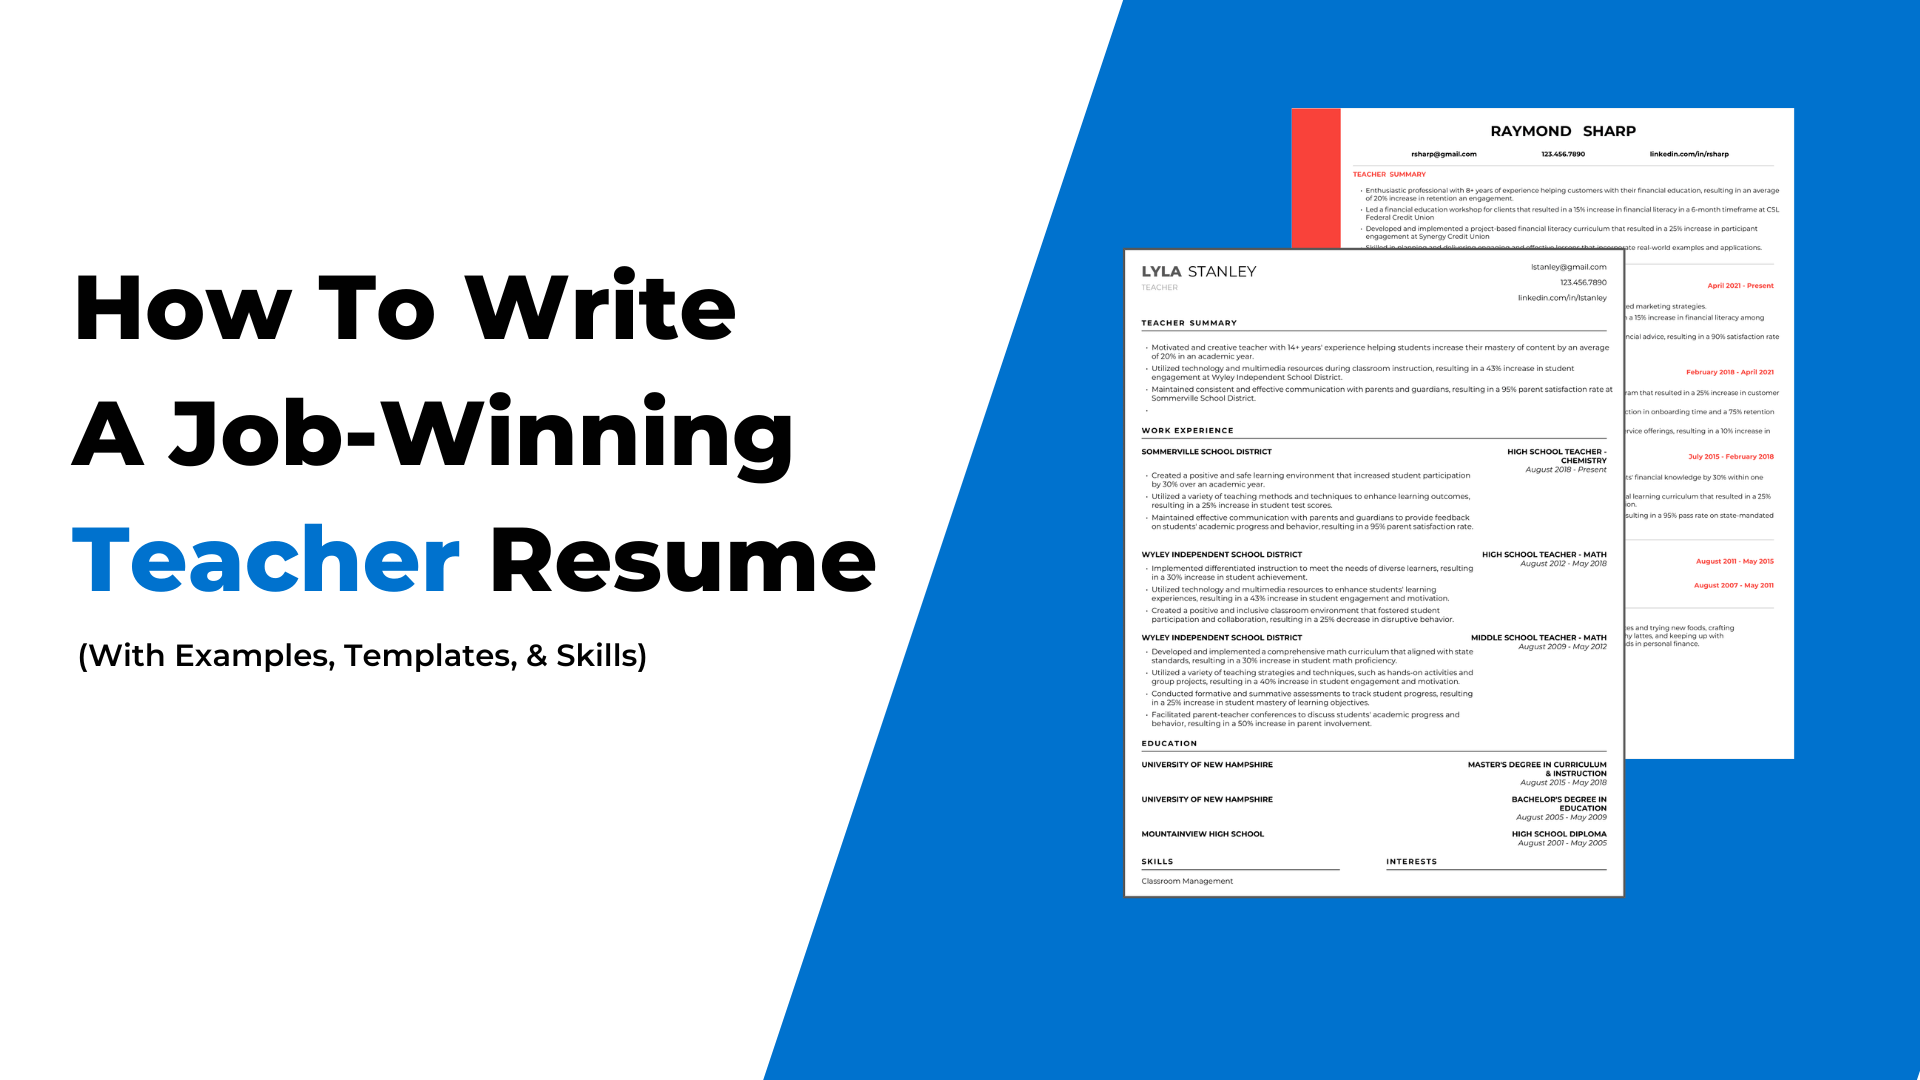 5 English Teacher Resume Examples & Guide for 2023